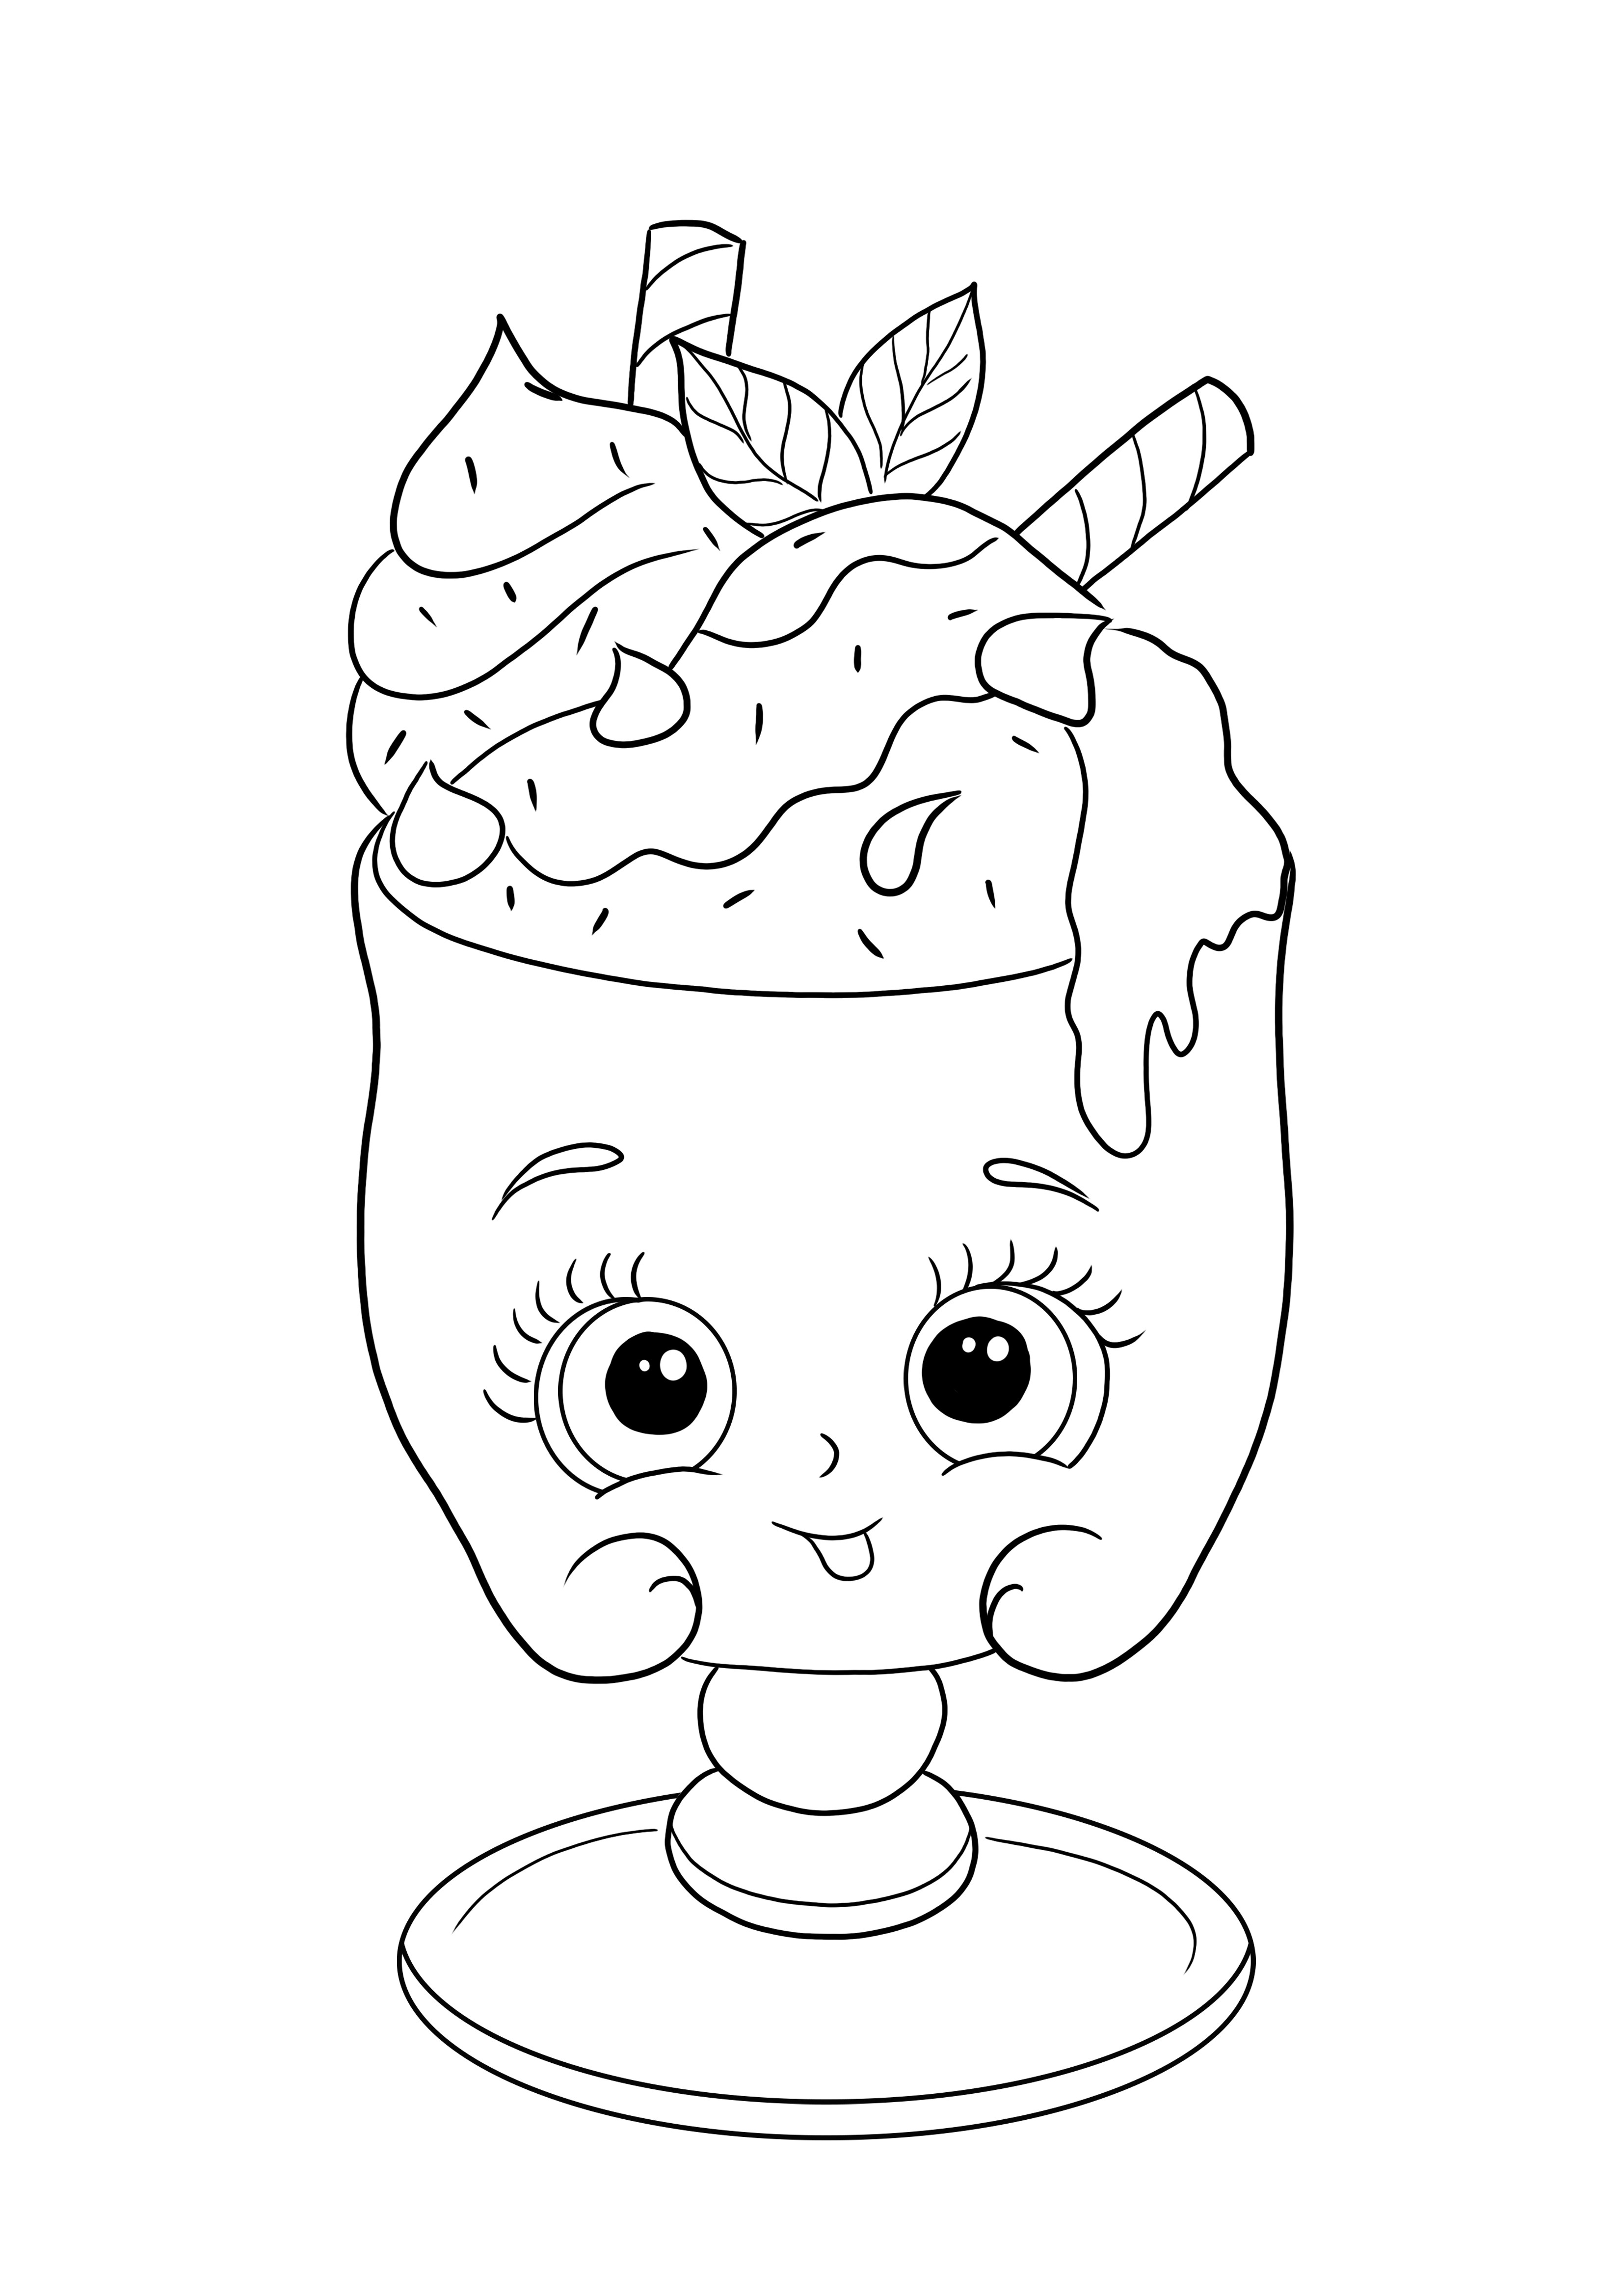 Choc Mint Charlie Shopkin-to color and download for free